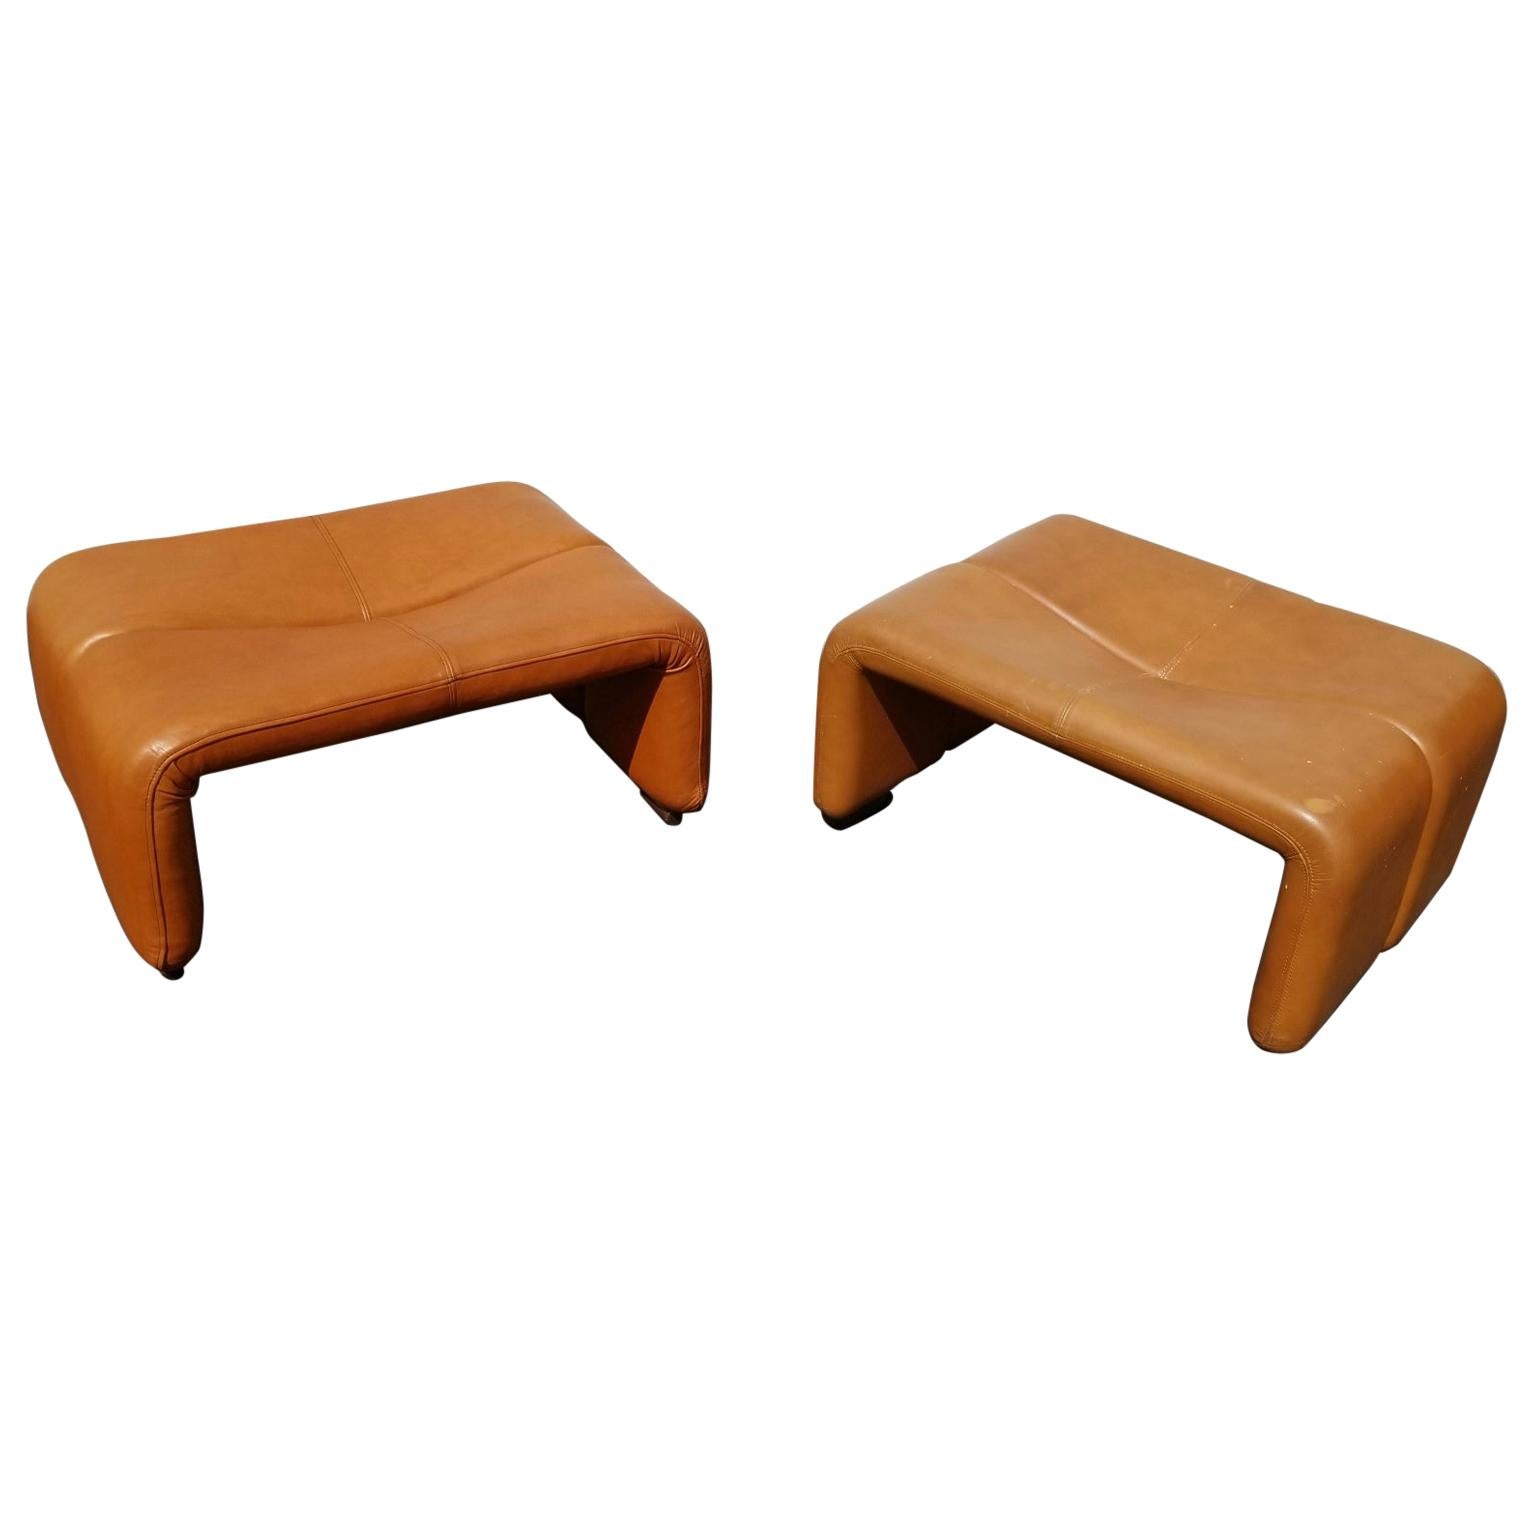 Pair of Leather Ottoman by Afra & Tobia Scarpa for B&B Italia